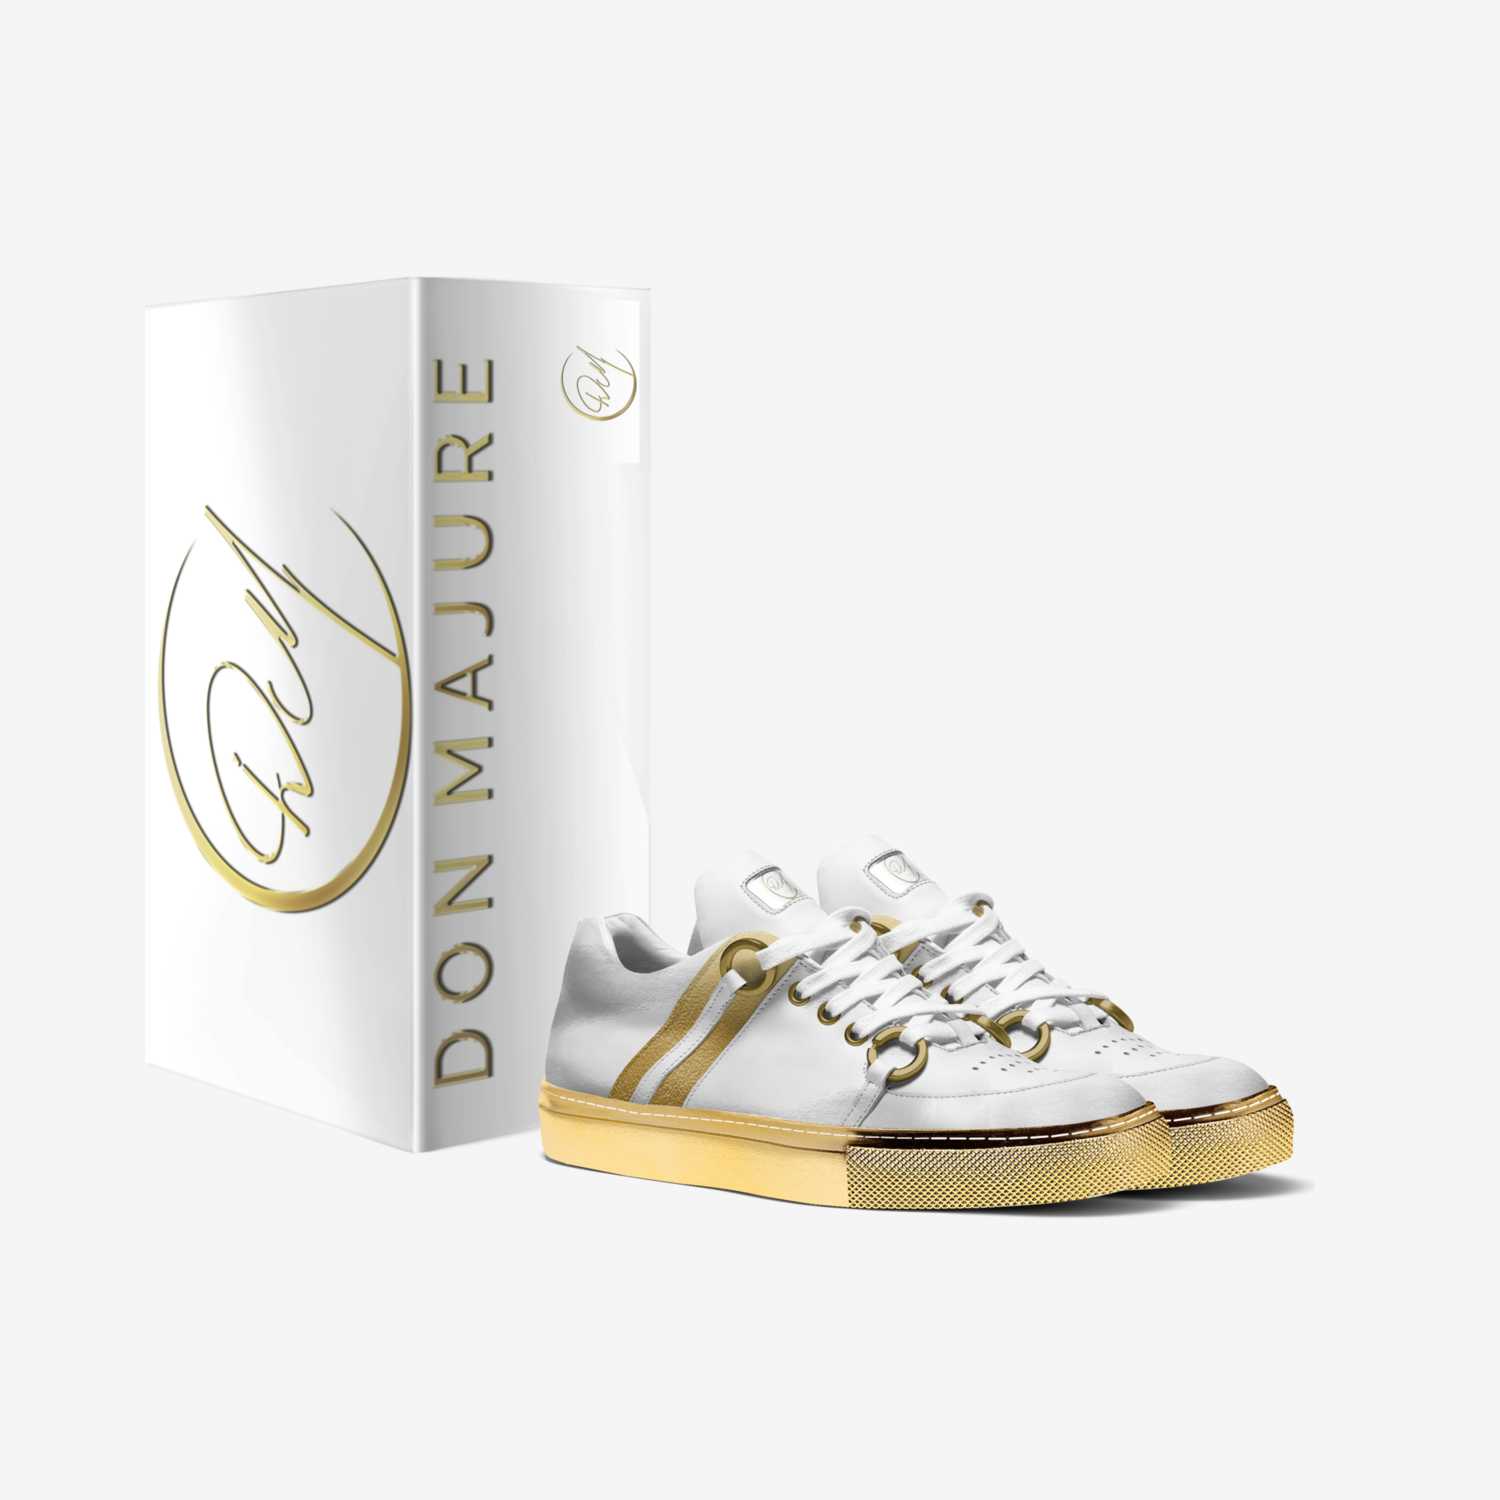 Majure RTL Gold custom made in Italy shoes by Donway Enterprises | Box view